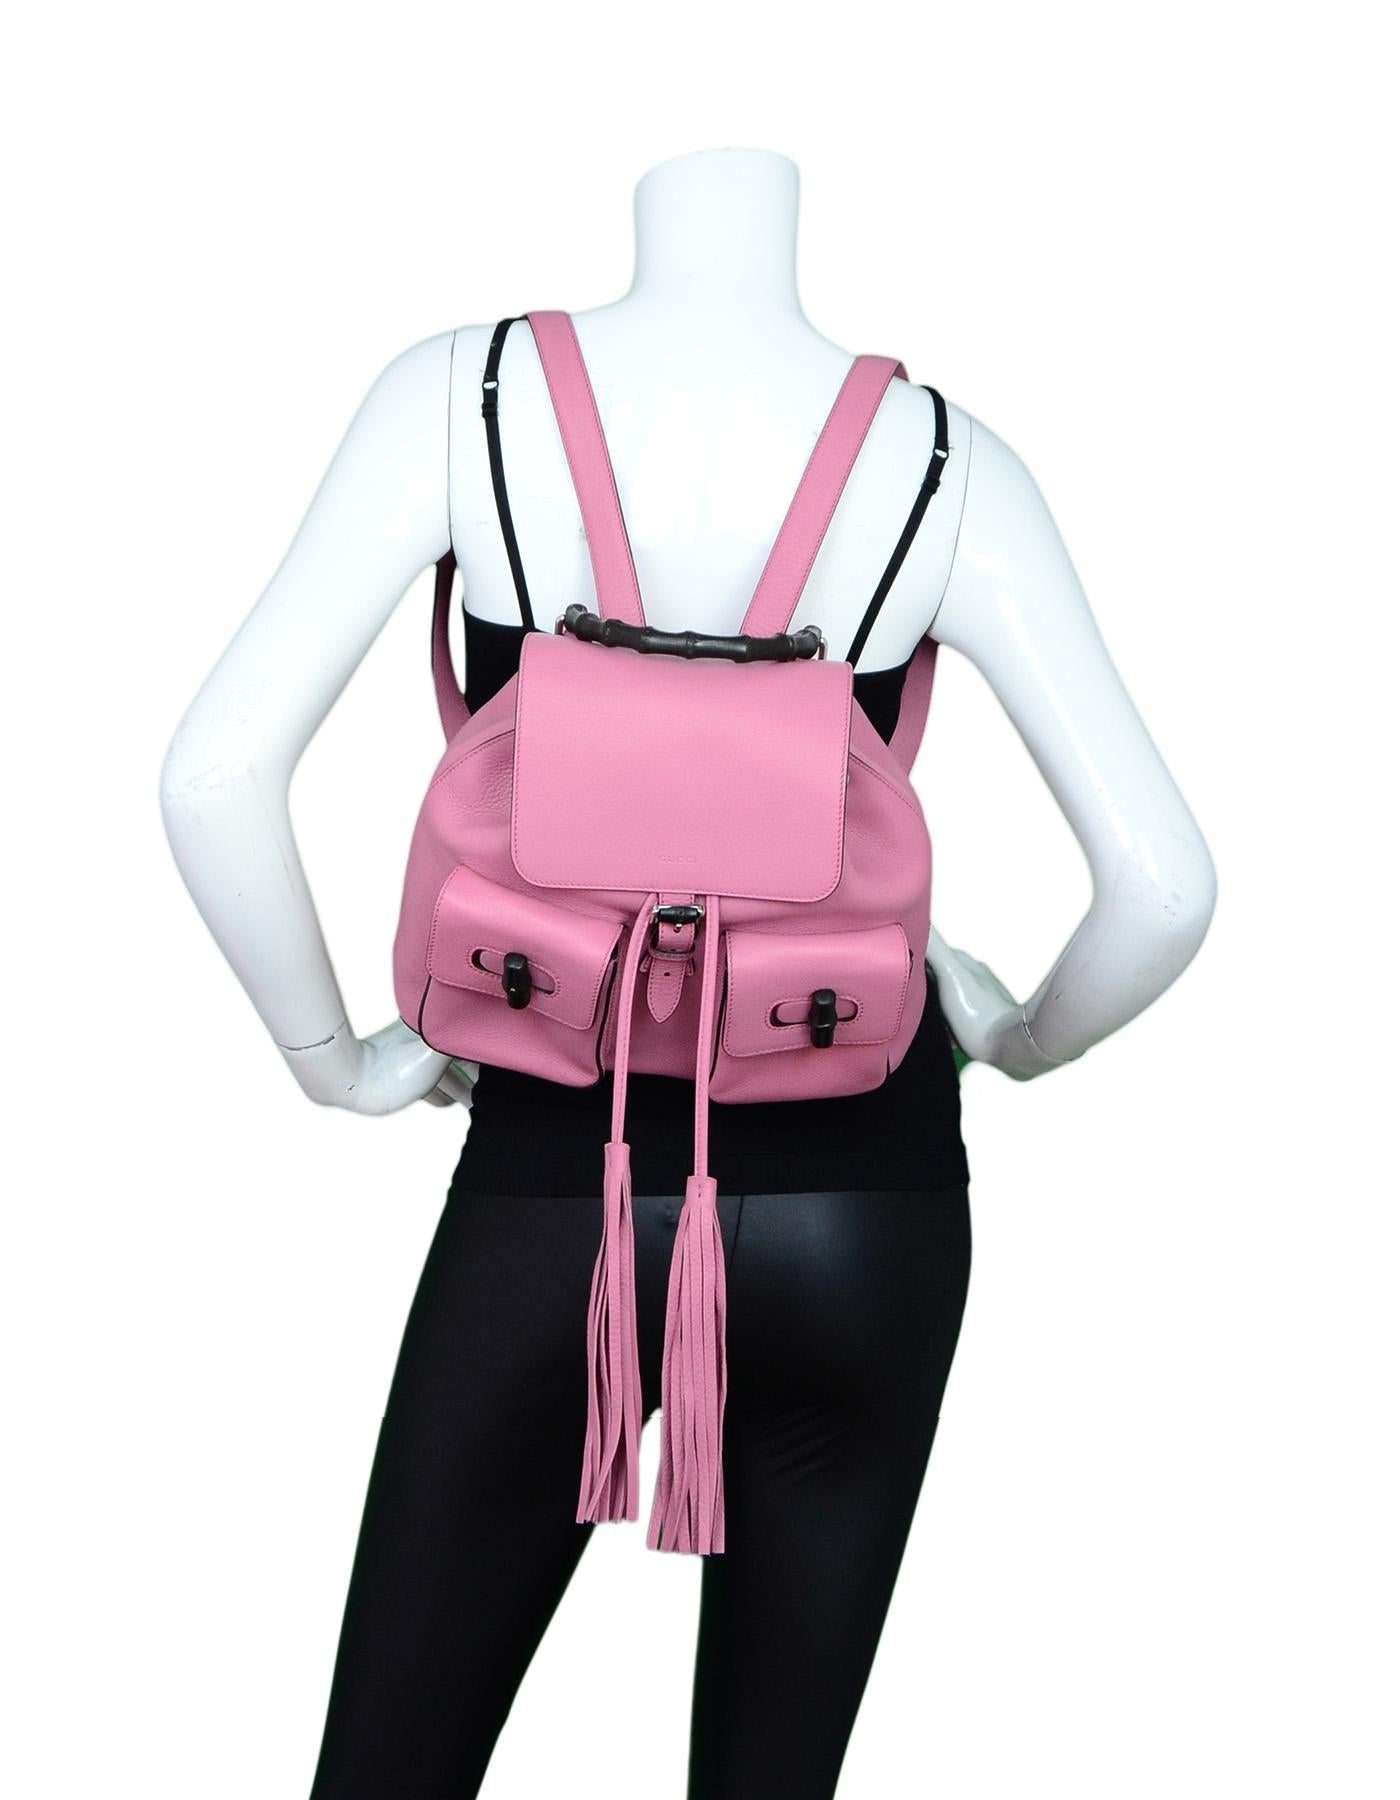 Gucci Glossy Pink Medium Bamboo Backpack Bag.  Features black bamboo twist lock pockets and bambo handle with pink tassel drawstring closure.

    Made In: Italy
    Color: 